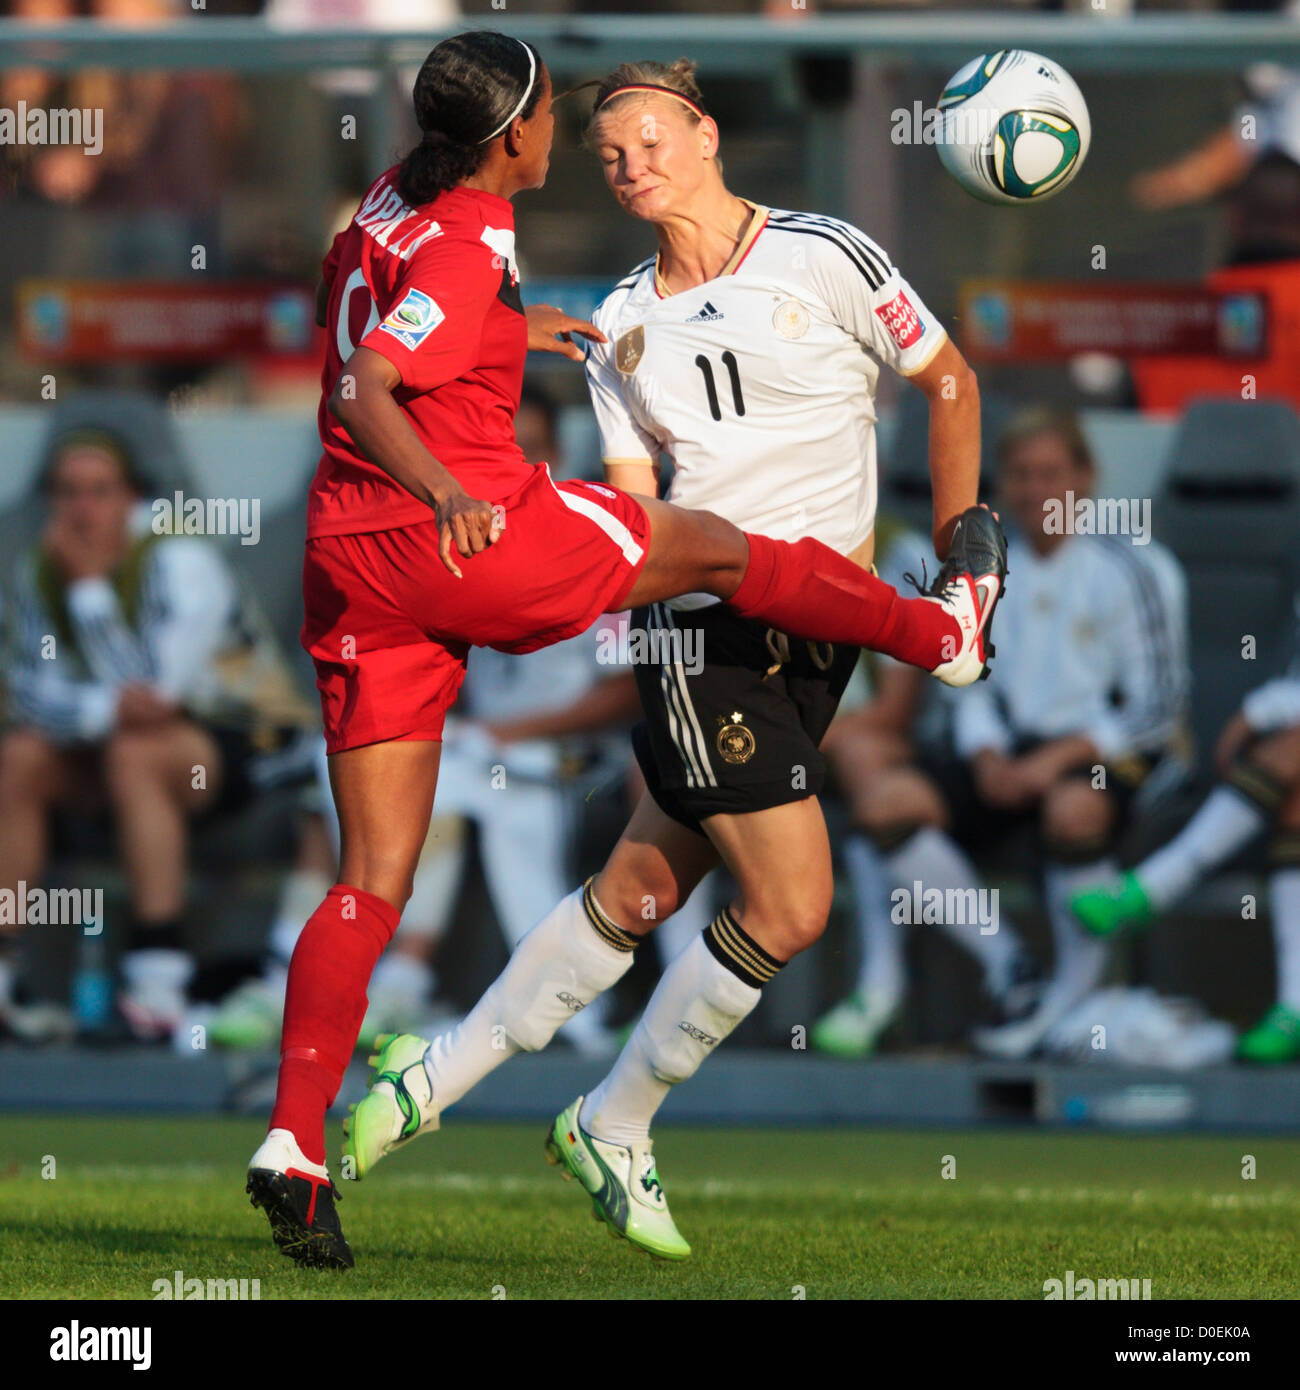 Candace Chapman of Canada (L) kicks the ball ahead of Alexandra Popp of Germany (R) during the opening match of the World Cup Stock Photo